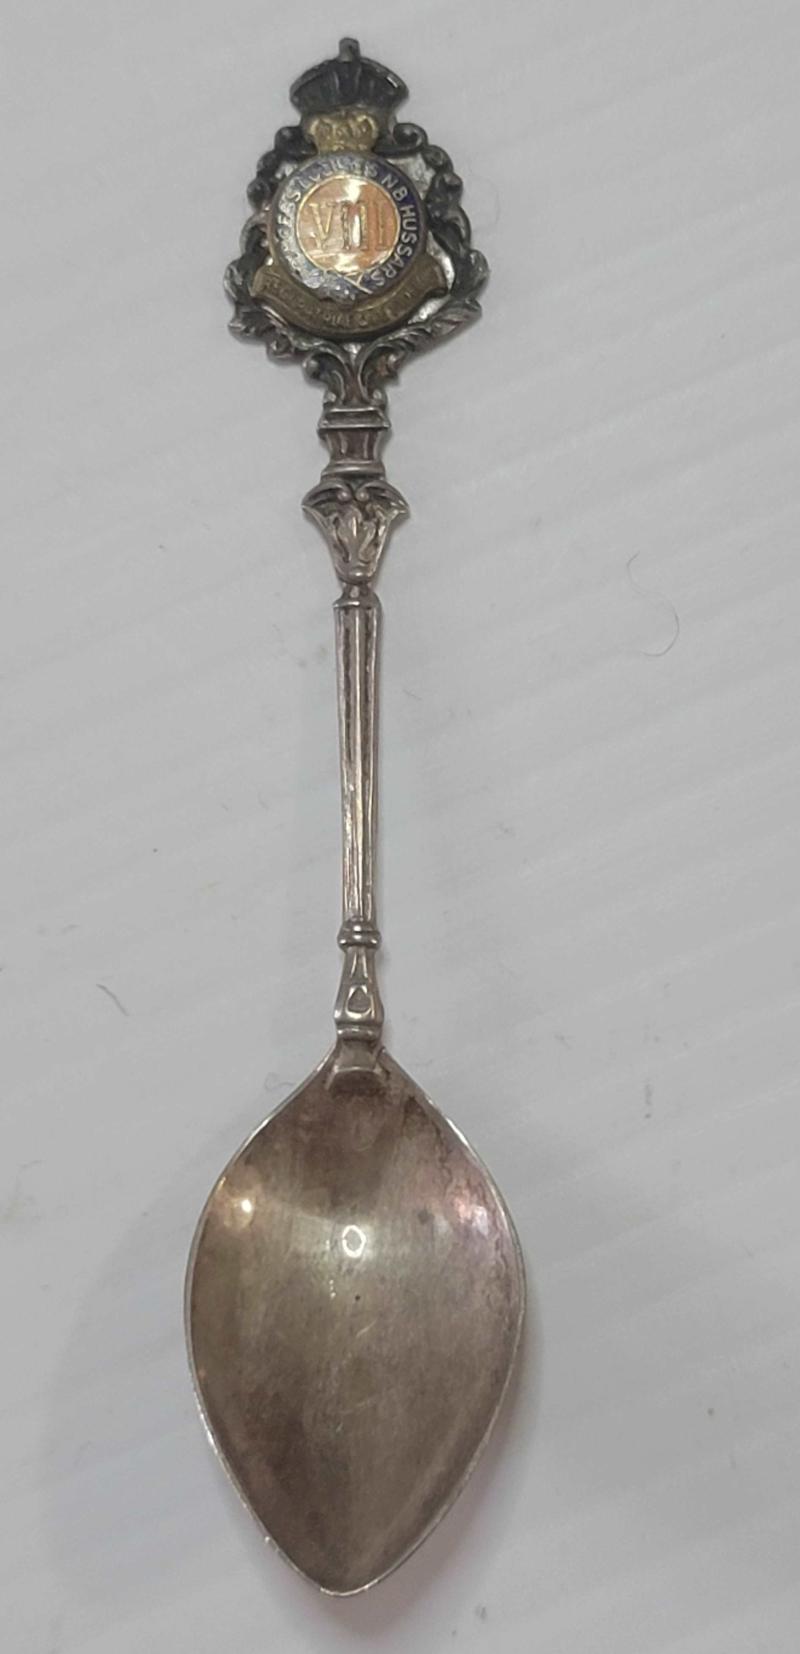 8th Canadian Hussar Commemorative Spoon